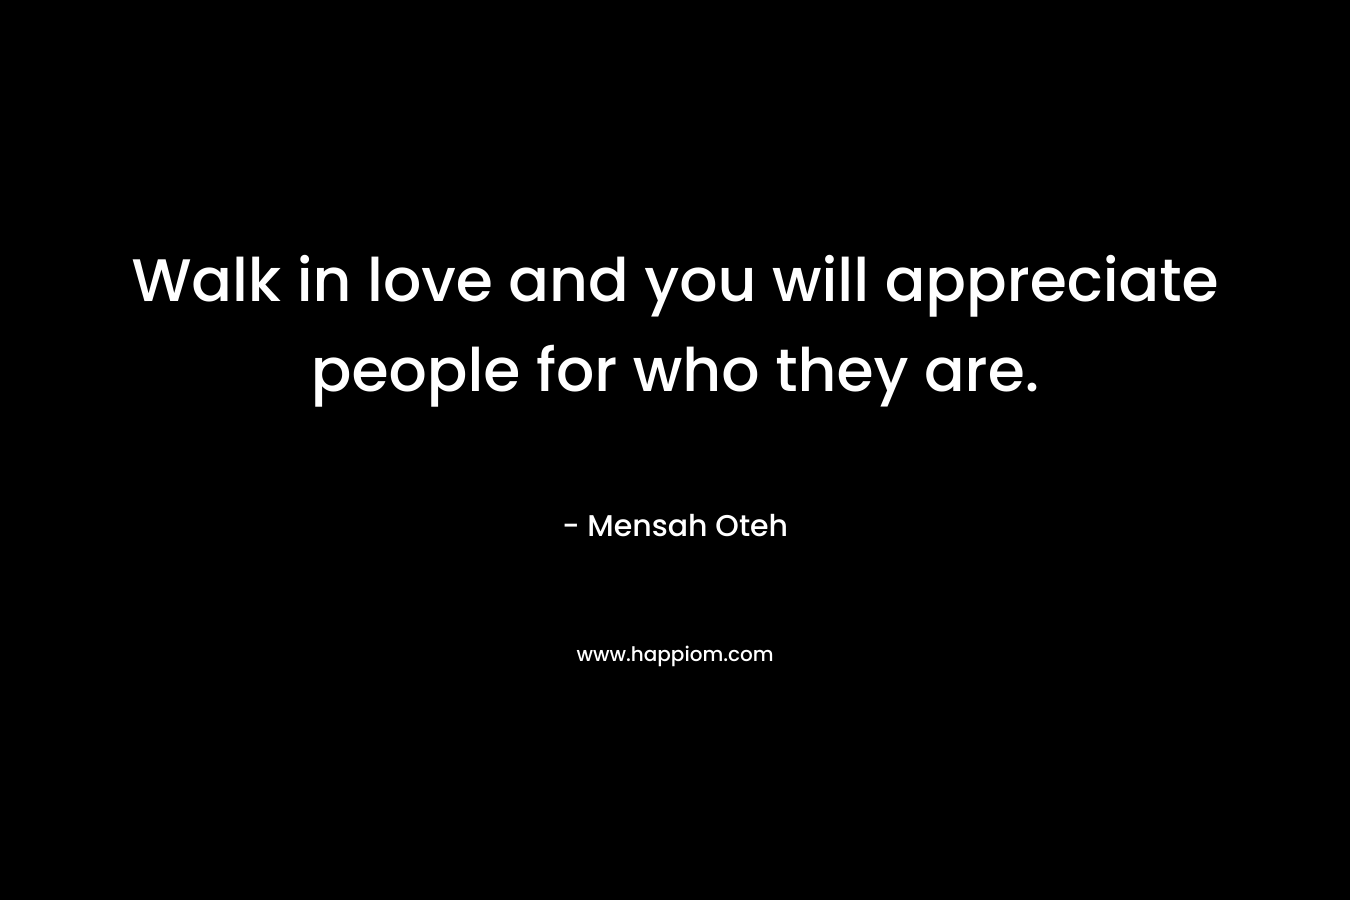 Walk in love and you will appreciate people for who they are. – Mensah Oteh